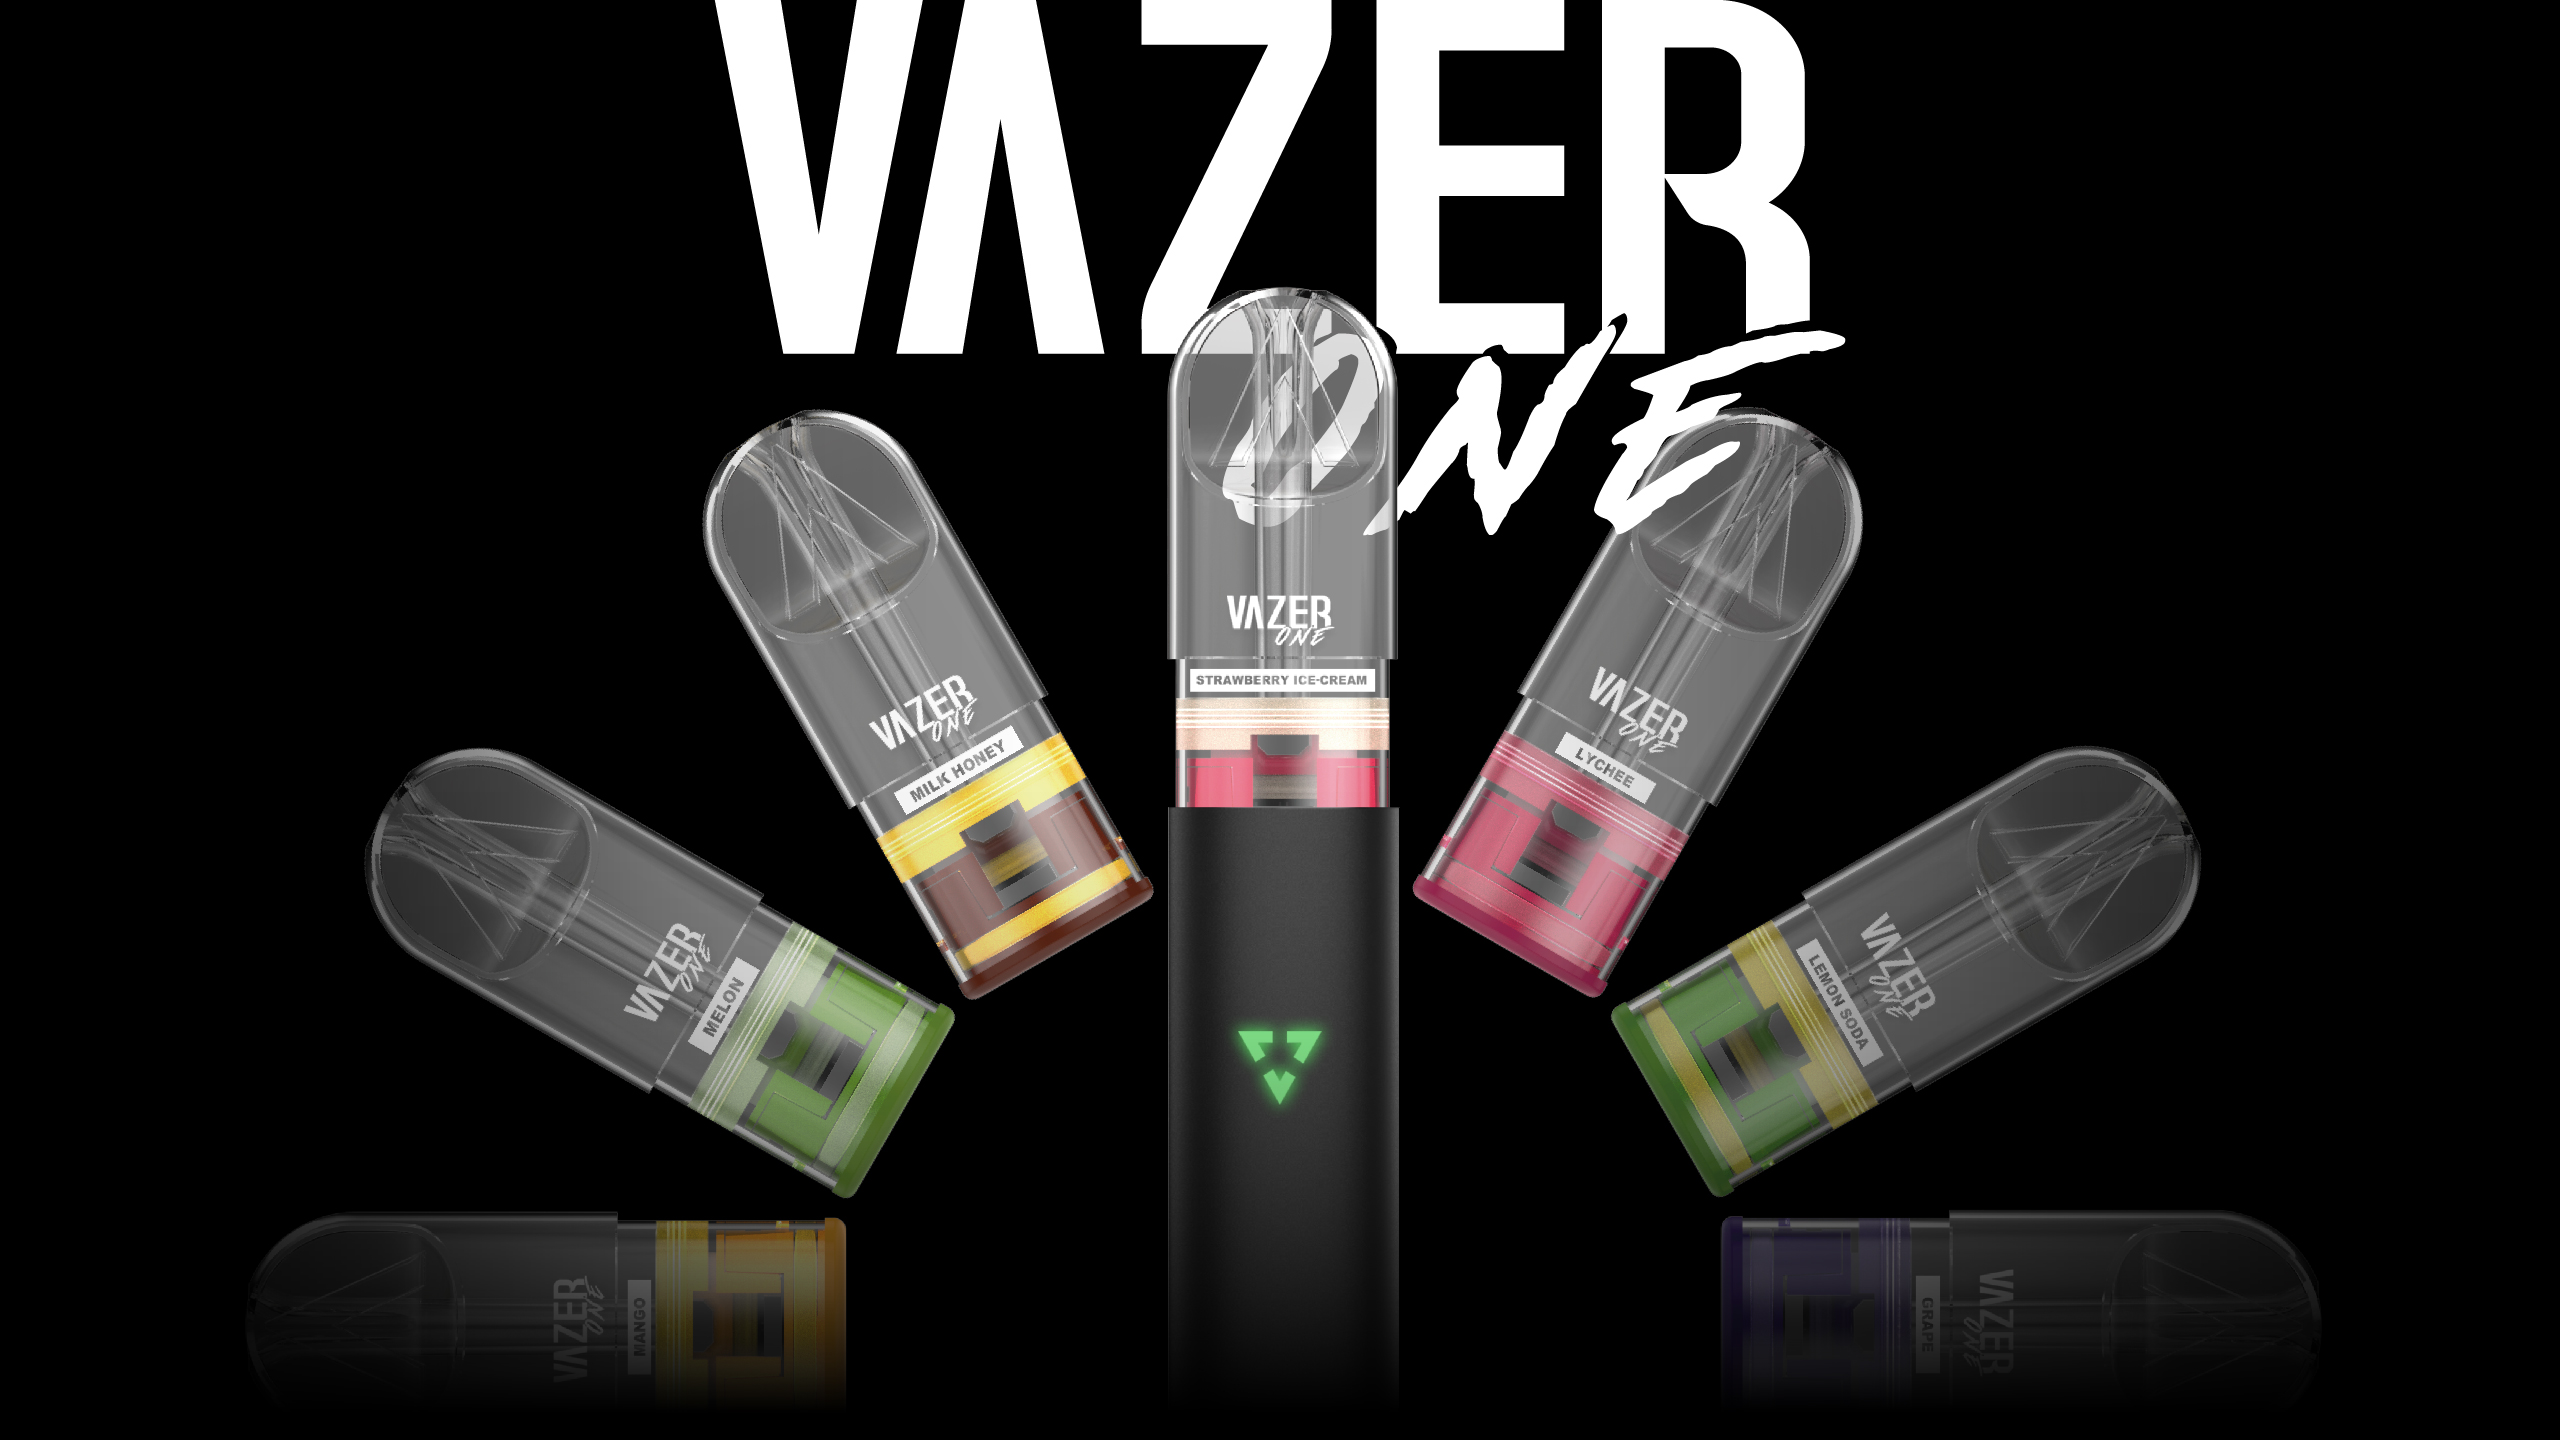 The Vazer One series stands out with its sleek design and advanced functionality. Available in eight vibrant colors, these pod close-system devices are designed to suit individual styles while delivering a top-notch vaping experience. In addition to the device itself, the Vazer One series brings an incredible range of flavors, offering 21 unique pod cartridges to match every palate. Whether you're into fruity, minty, or dessert-like flavors, Vazer One has a meticulously formulated pod cartridge for you. Each cartridge is crafted with high-quality ingredients, including Propylene Glycol, Vegetable Glycerin, Flavoring Agent, sweetener, and nicotine, ensuring a smooth and satisfying puff every time. The comprehensive offerings of Vazer One make it more than just a product; it's an experience tailored to meet the diverse needs and preferences of modern vapers. So why settle for less? Elevate your vaping journey today with Vazer.